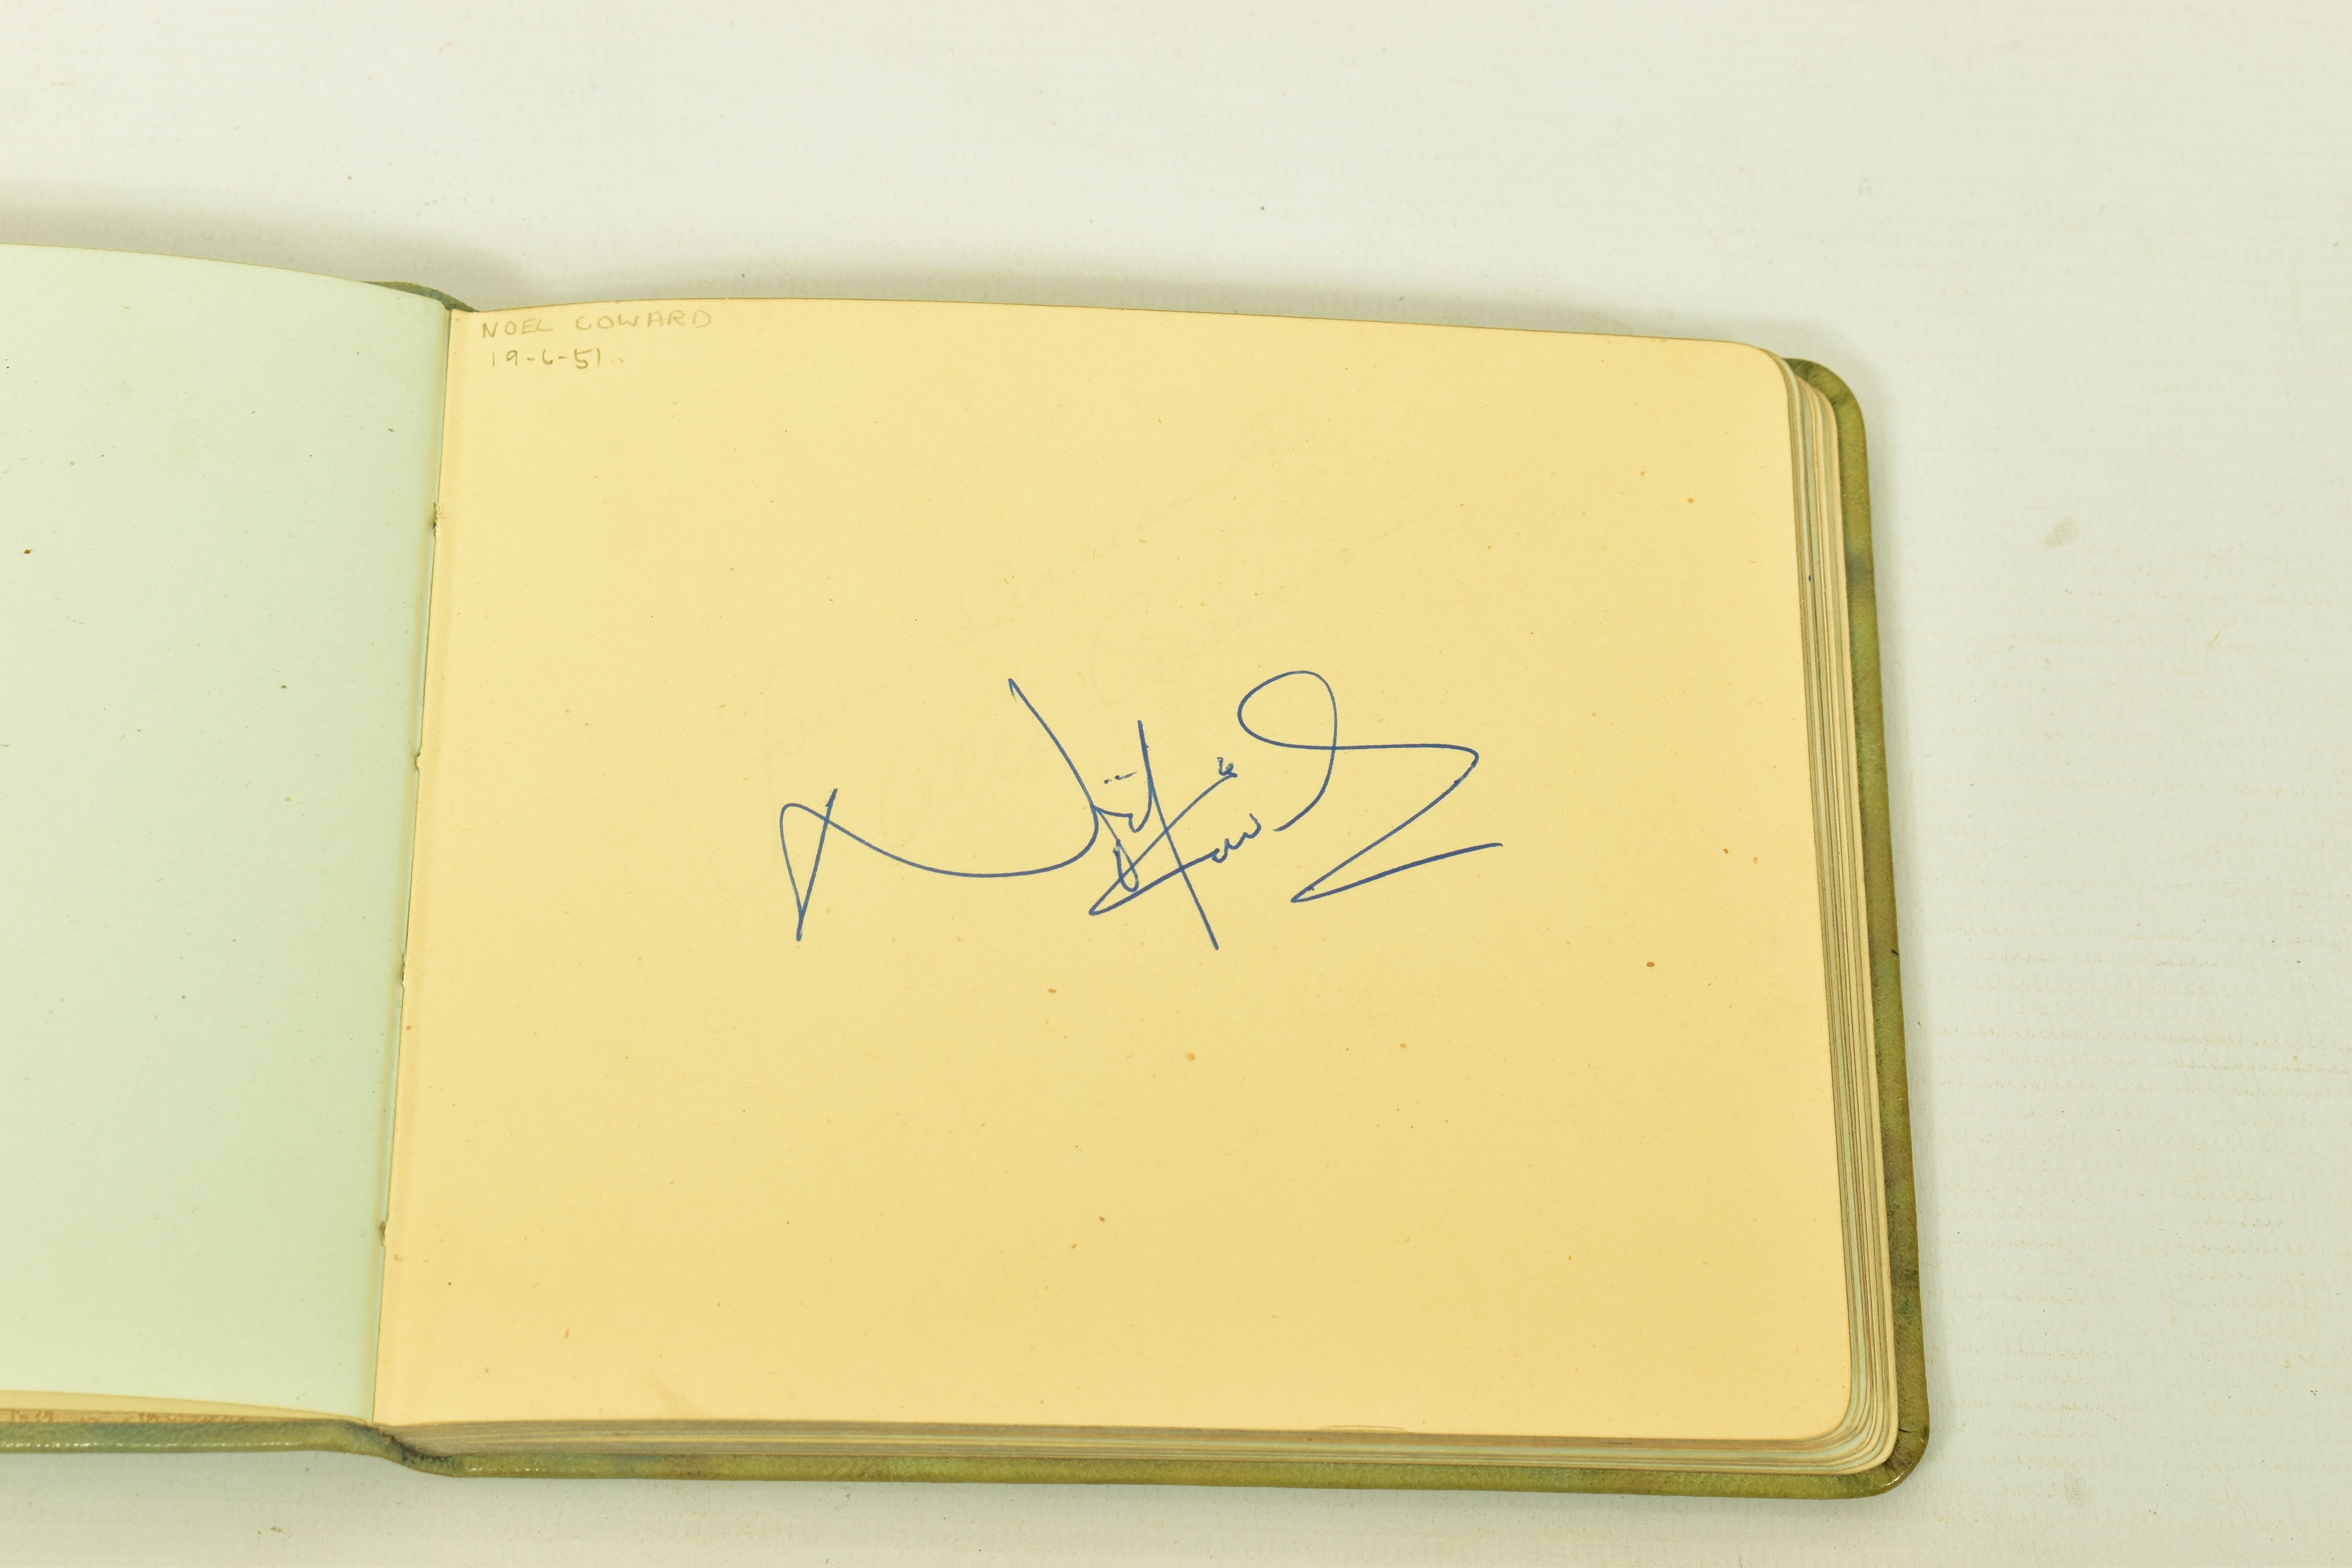 FILM & STAGE AUTOGRAPH ALBUM, a collection of signatures in an autograph album featuring some of the - Image 2 of 12